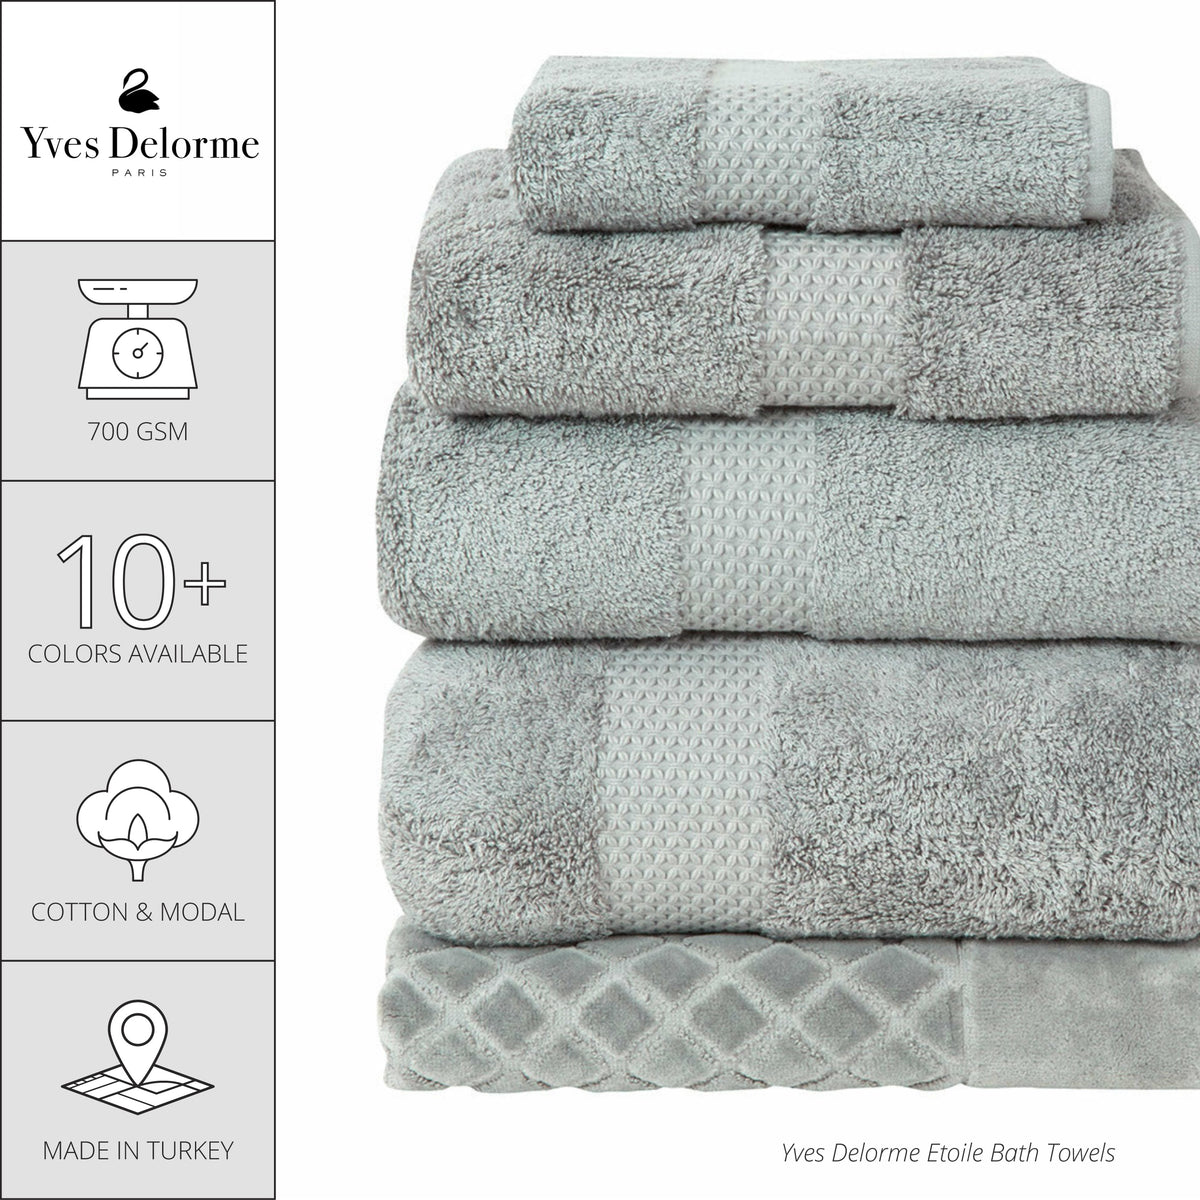 Yves Delorme Etoile Bath Towels and Mats - Pierre